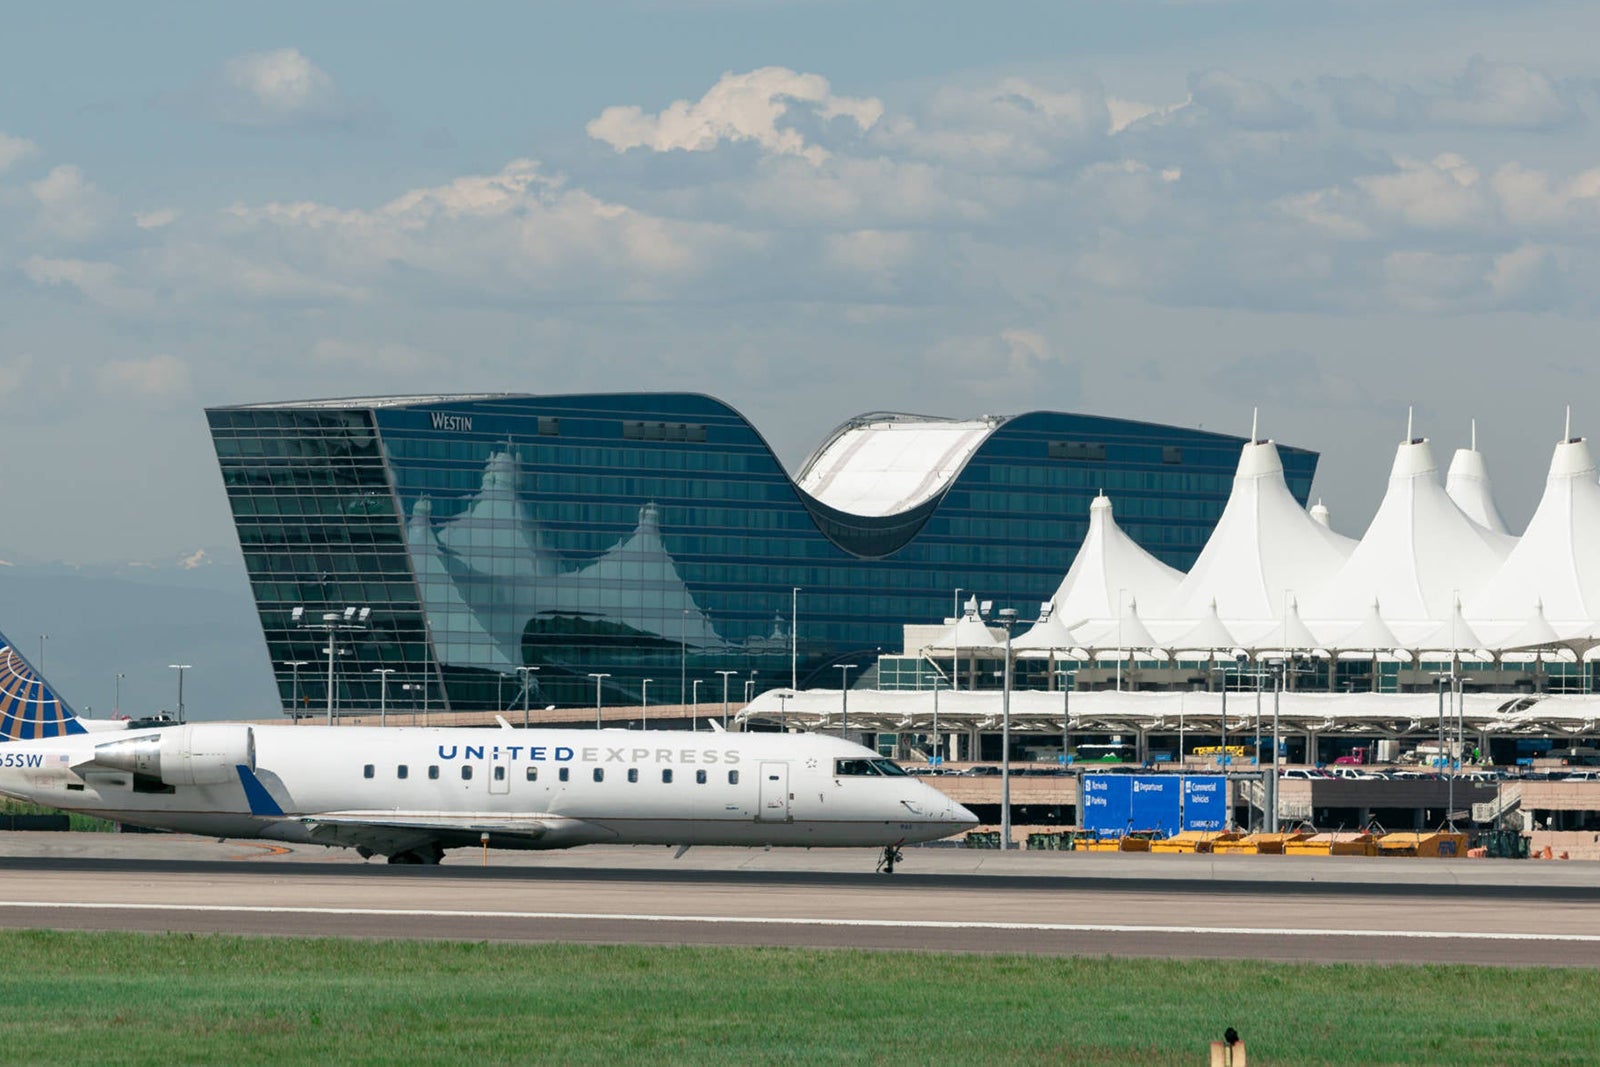 A plane taxis on the runway at Denver's airport